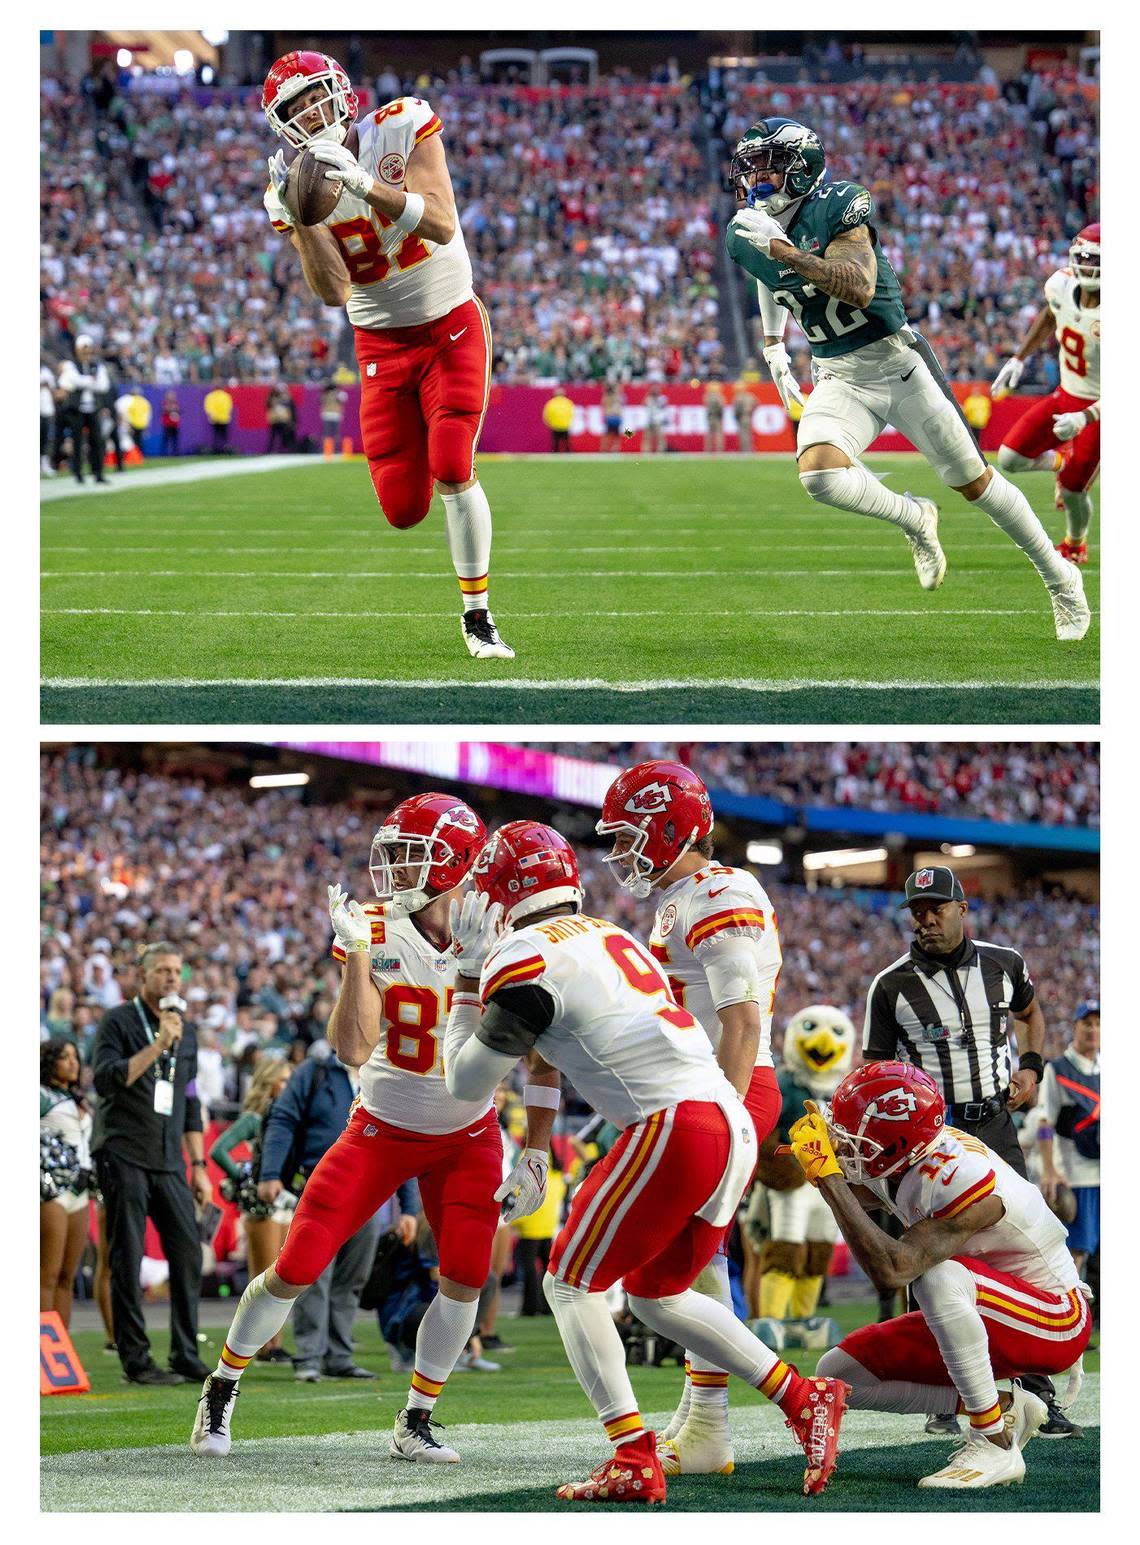 Kansas City Chiefs tight end Travis Kelce (87) catches a touchdown pass behind Philadelphia Eagles safety Marcus Epps (22) during the Super Bowl LVII football game on Monday, Feb. 13, 2023, in Glendale, Ariz. He celebrated his game-tying score by doing the stanky leg dance with wide receiver JuJu Smith-Schuster (9), quarterback Patrick Mahomes (15) and wide receiver Marquez Valdes-Scantling (11).